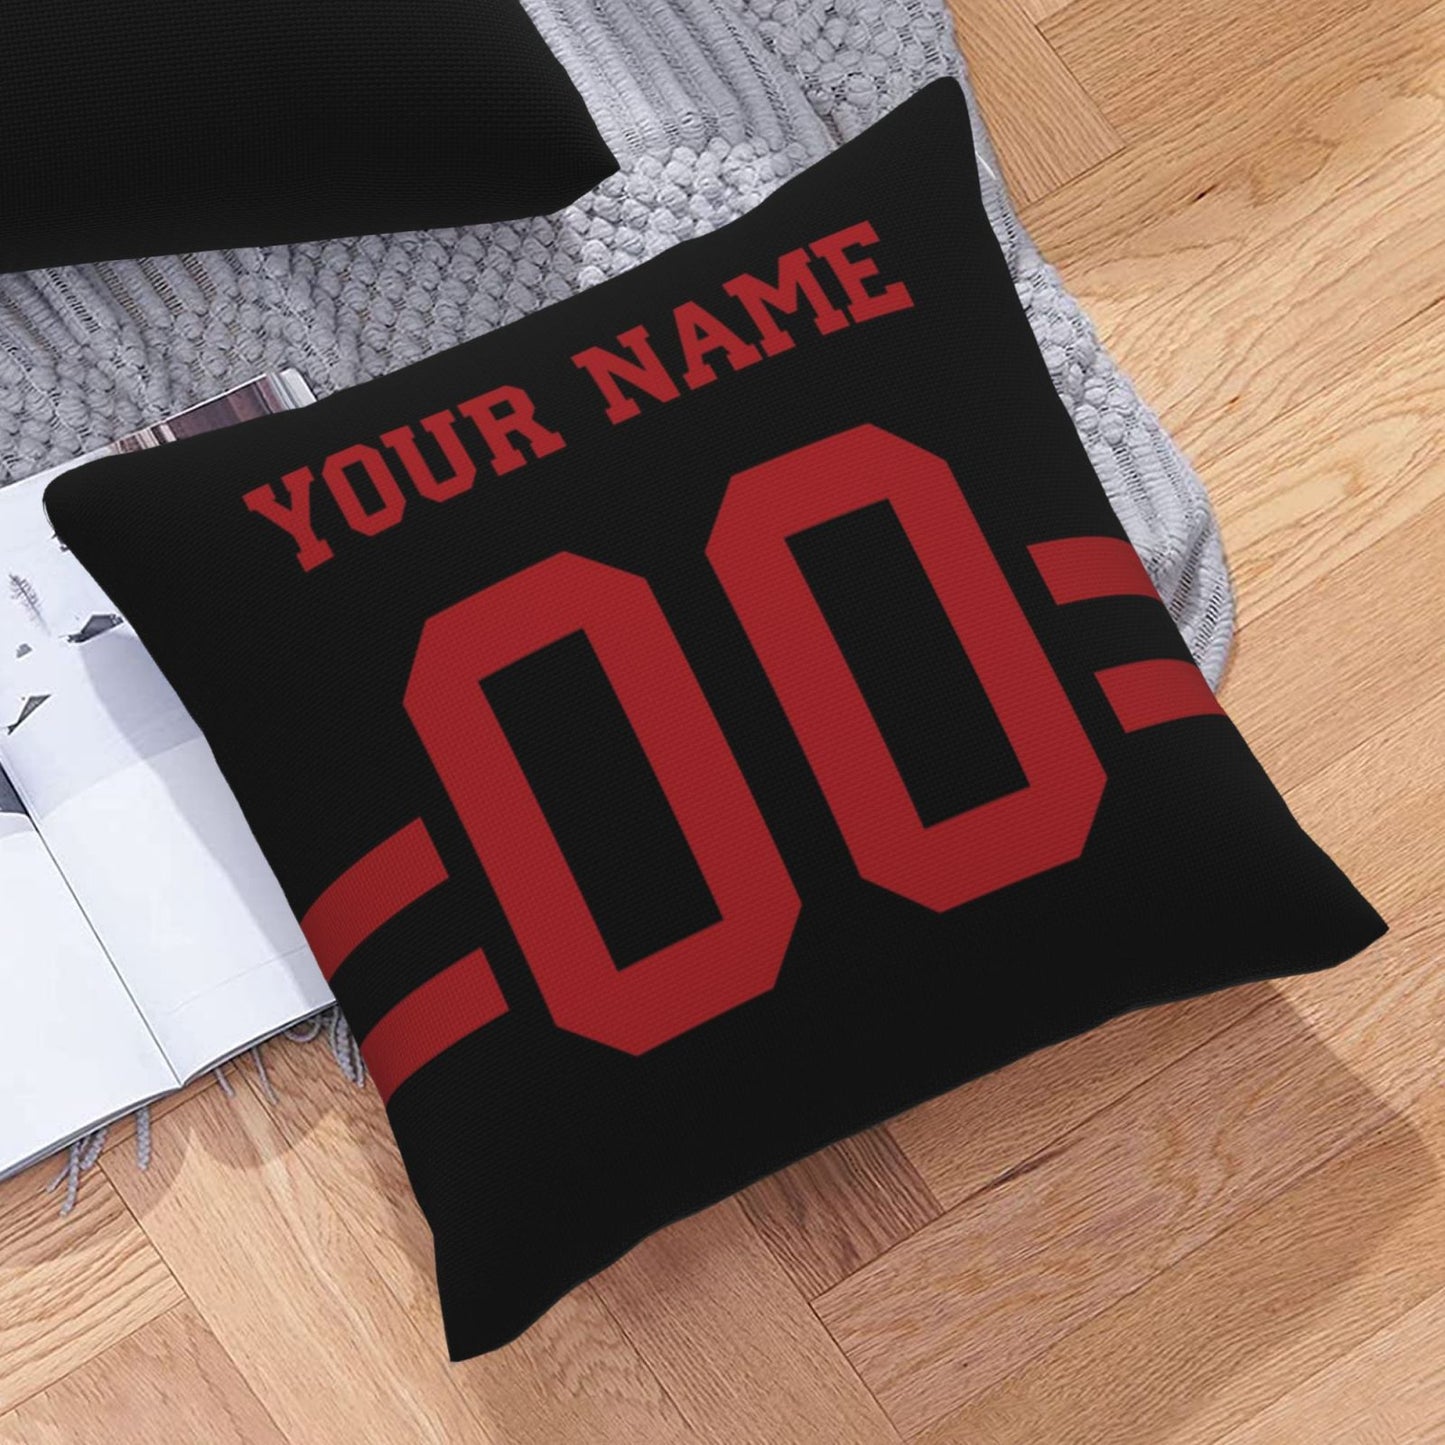 Custom Black San Francisco 49ers Decorative Throw Pillow Case - Print Personalized Football Team Fans Name & Number Birthday Gift